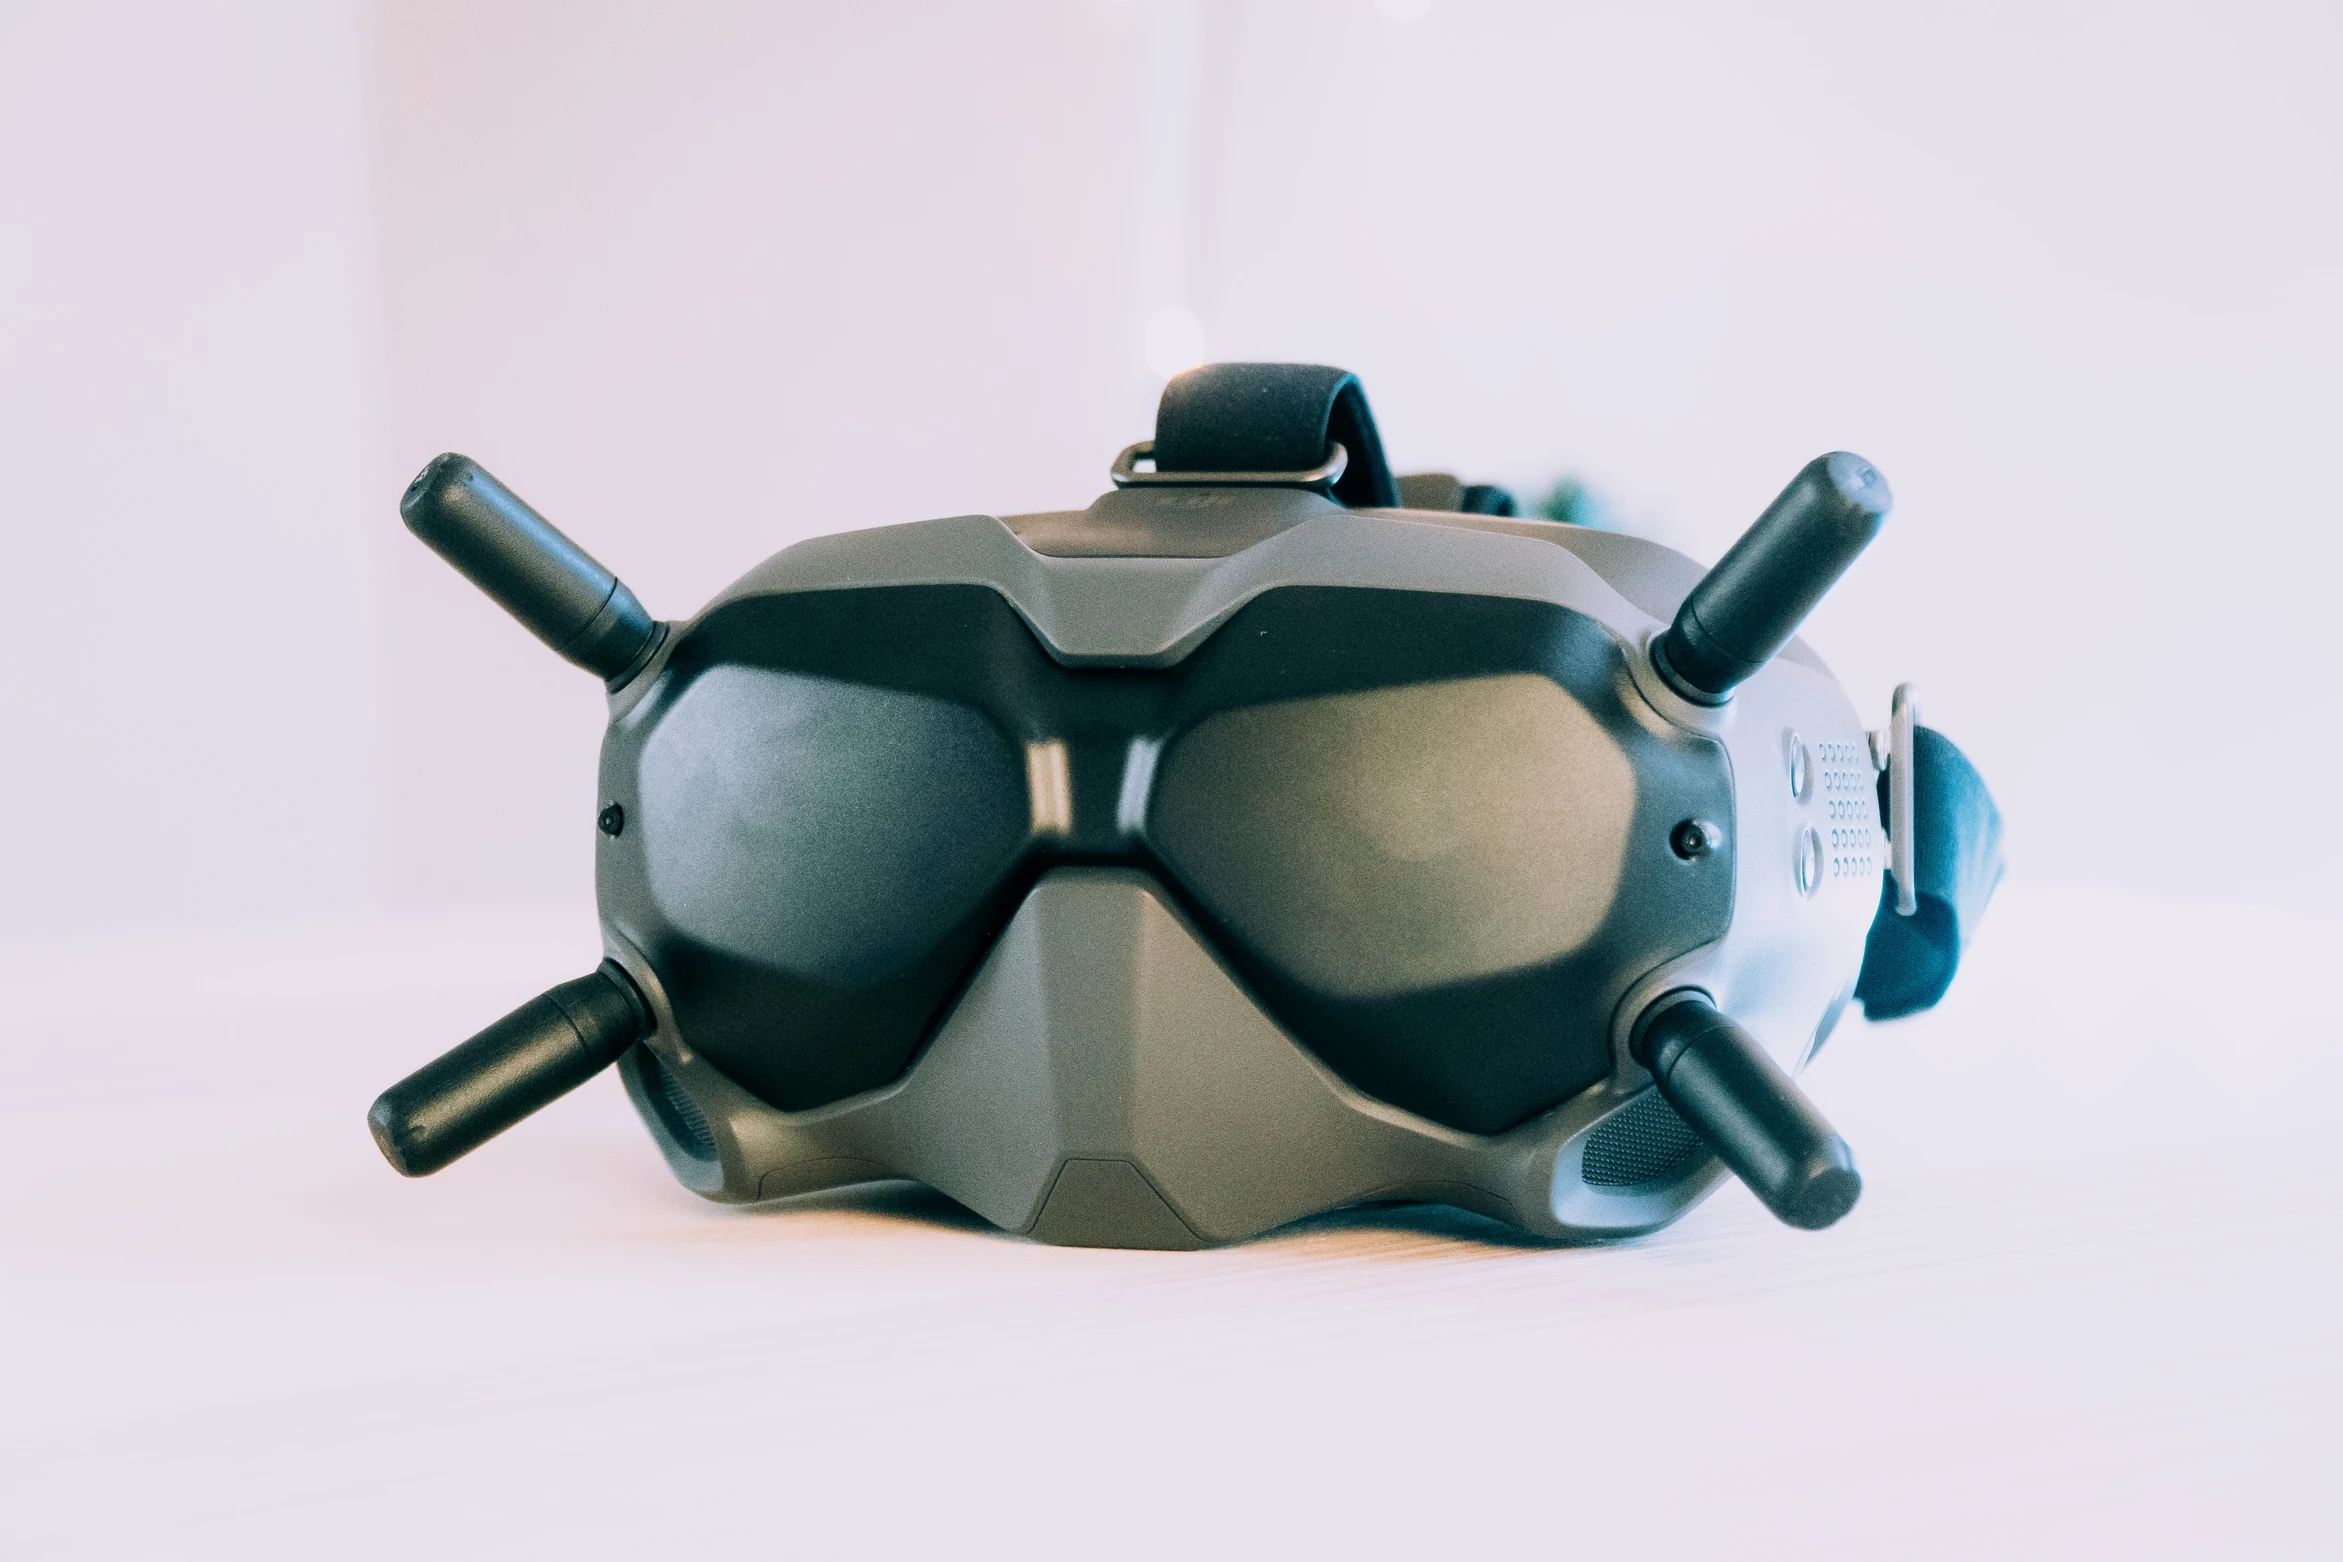 FPV goggles resting on a table